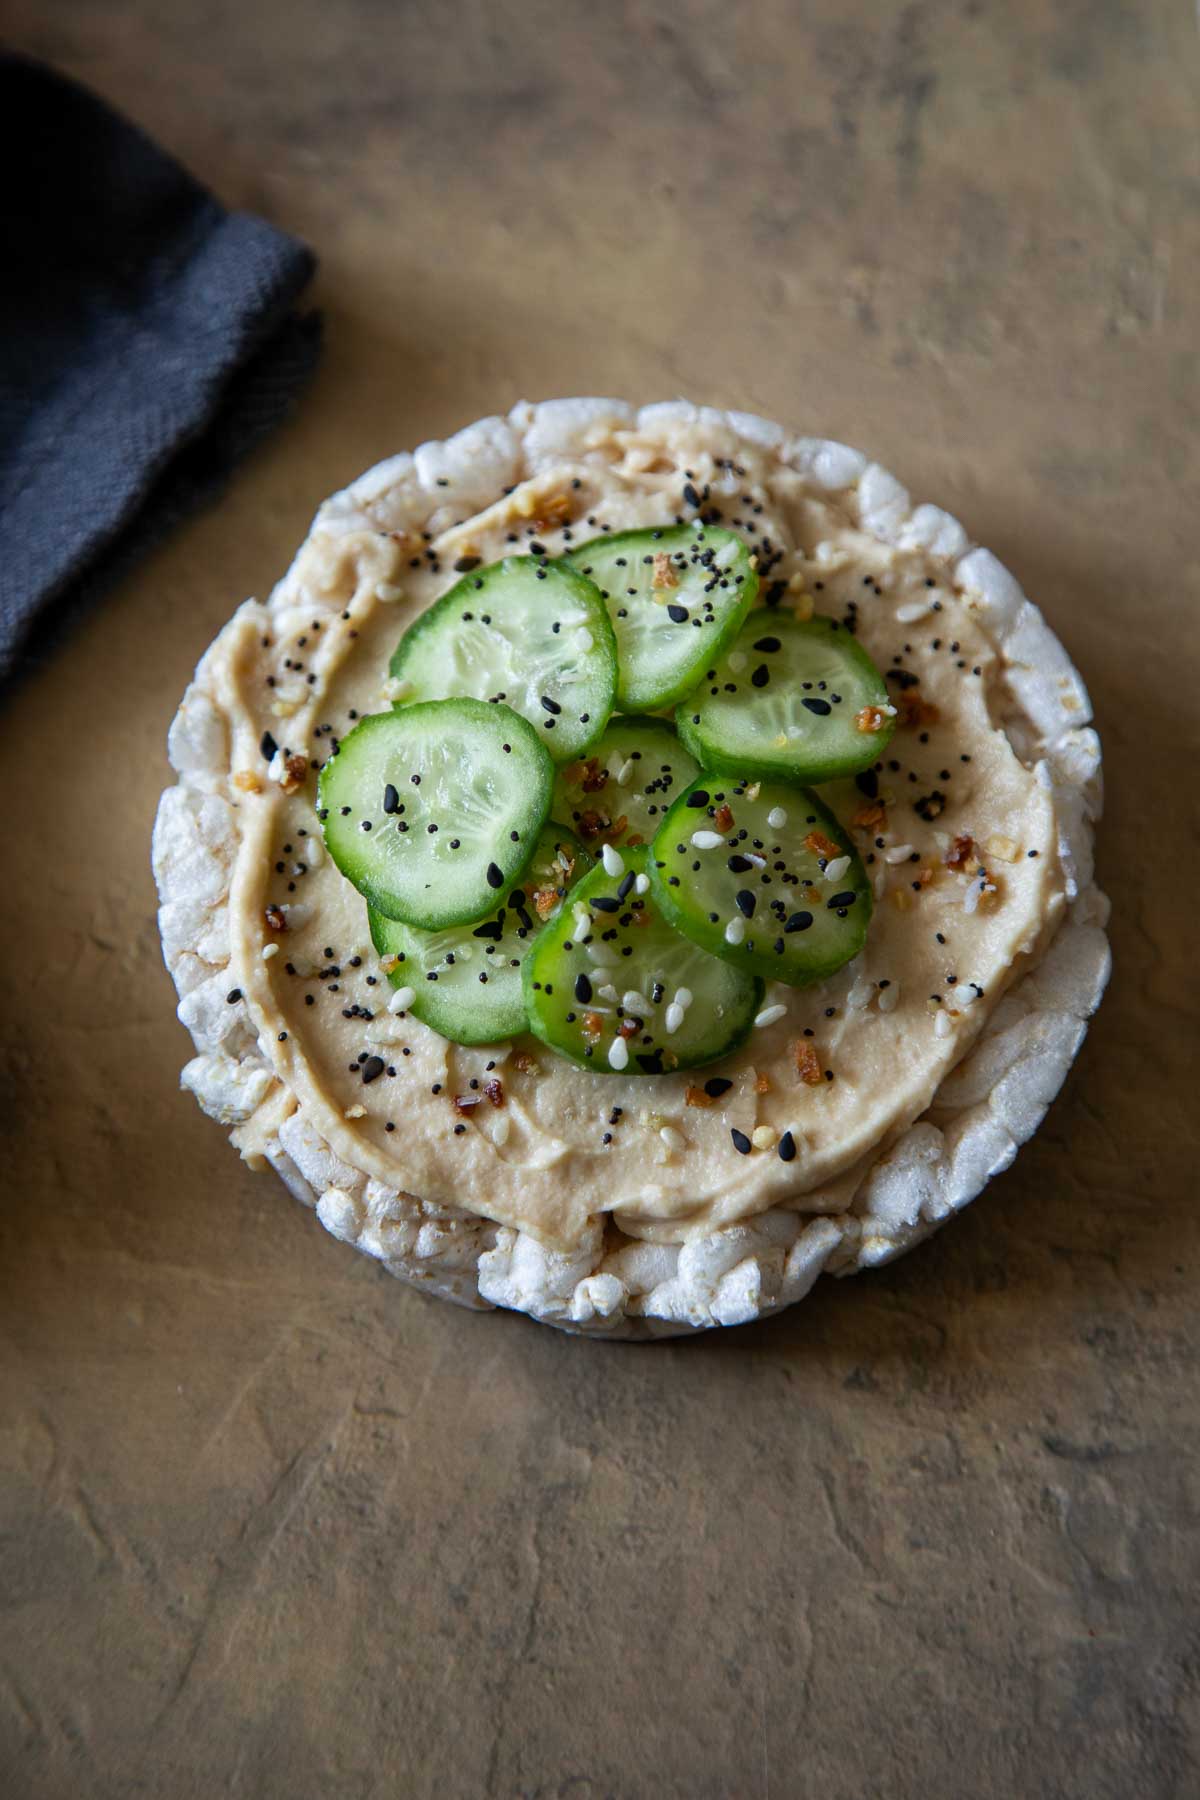 CUcumber slices, hummus, and everything seasoning on Rice Cake - Healthy Rice Cake Snacks + Toppings